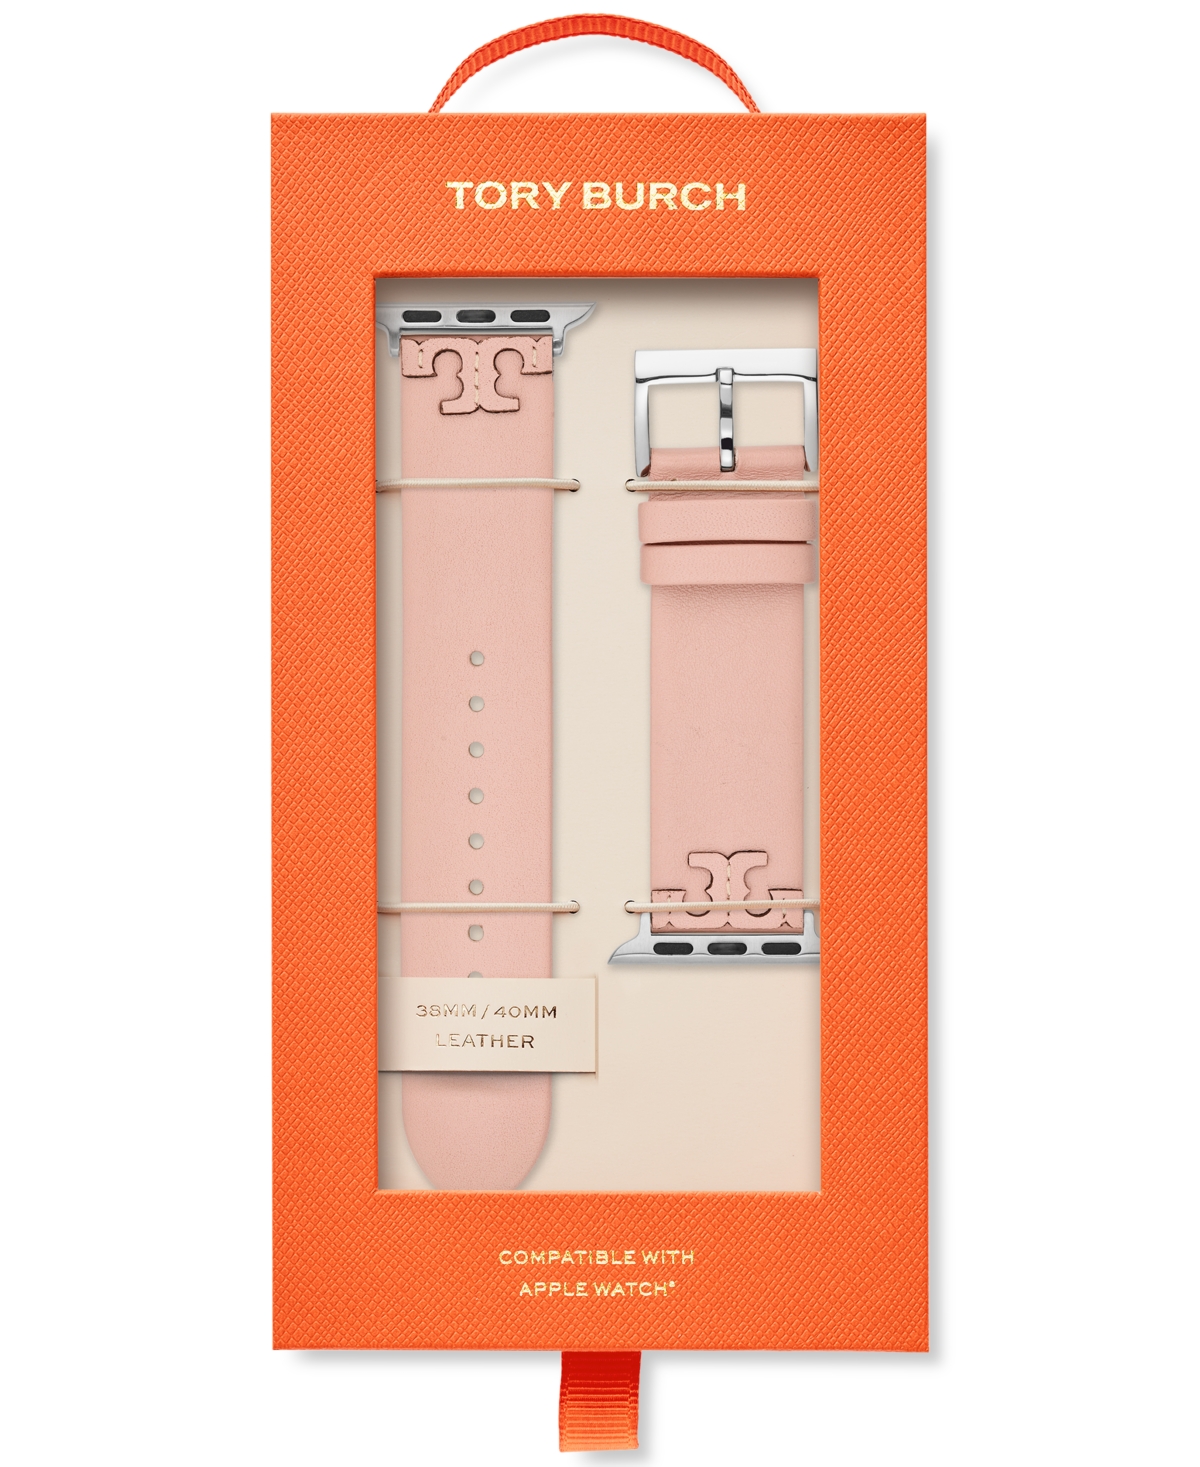 Shop Tory Burch Women's Mcgraw Blush Band For Apple Watch Leather Strap 38mm/40mm